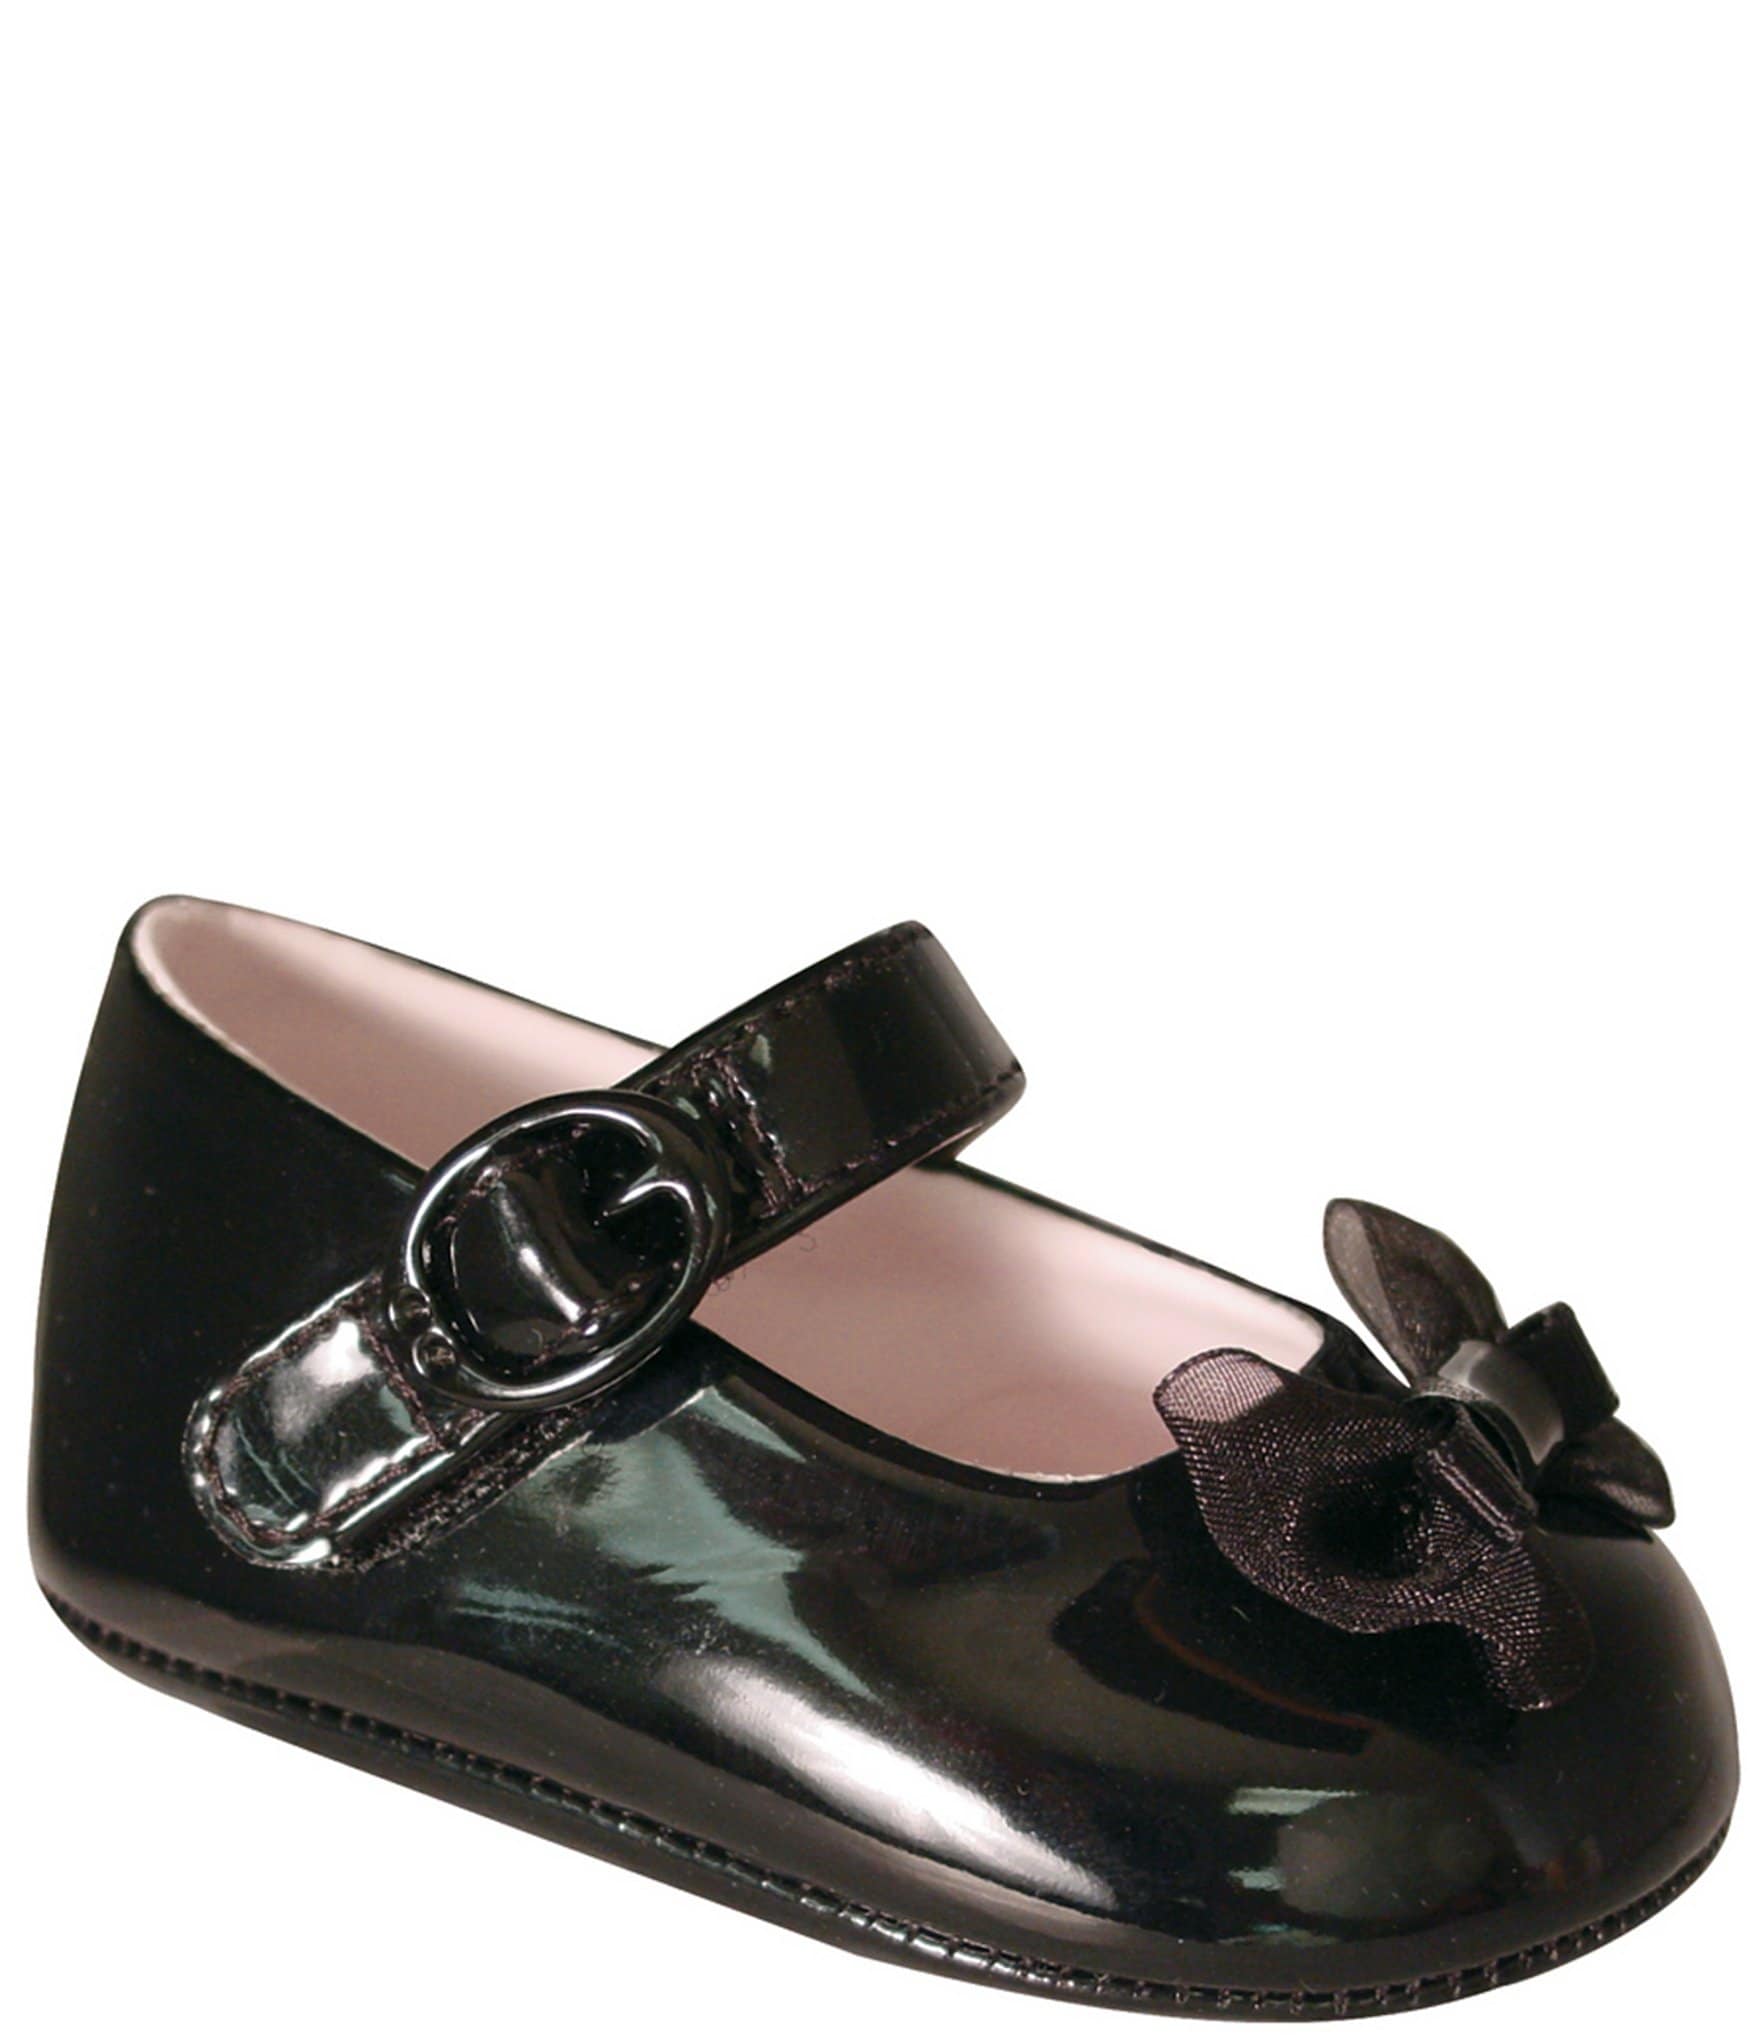 black baby dress shoes